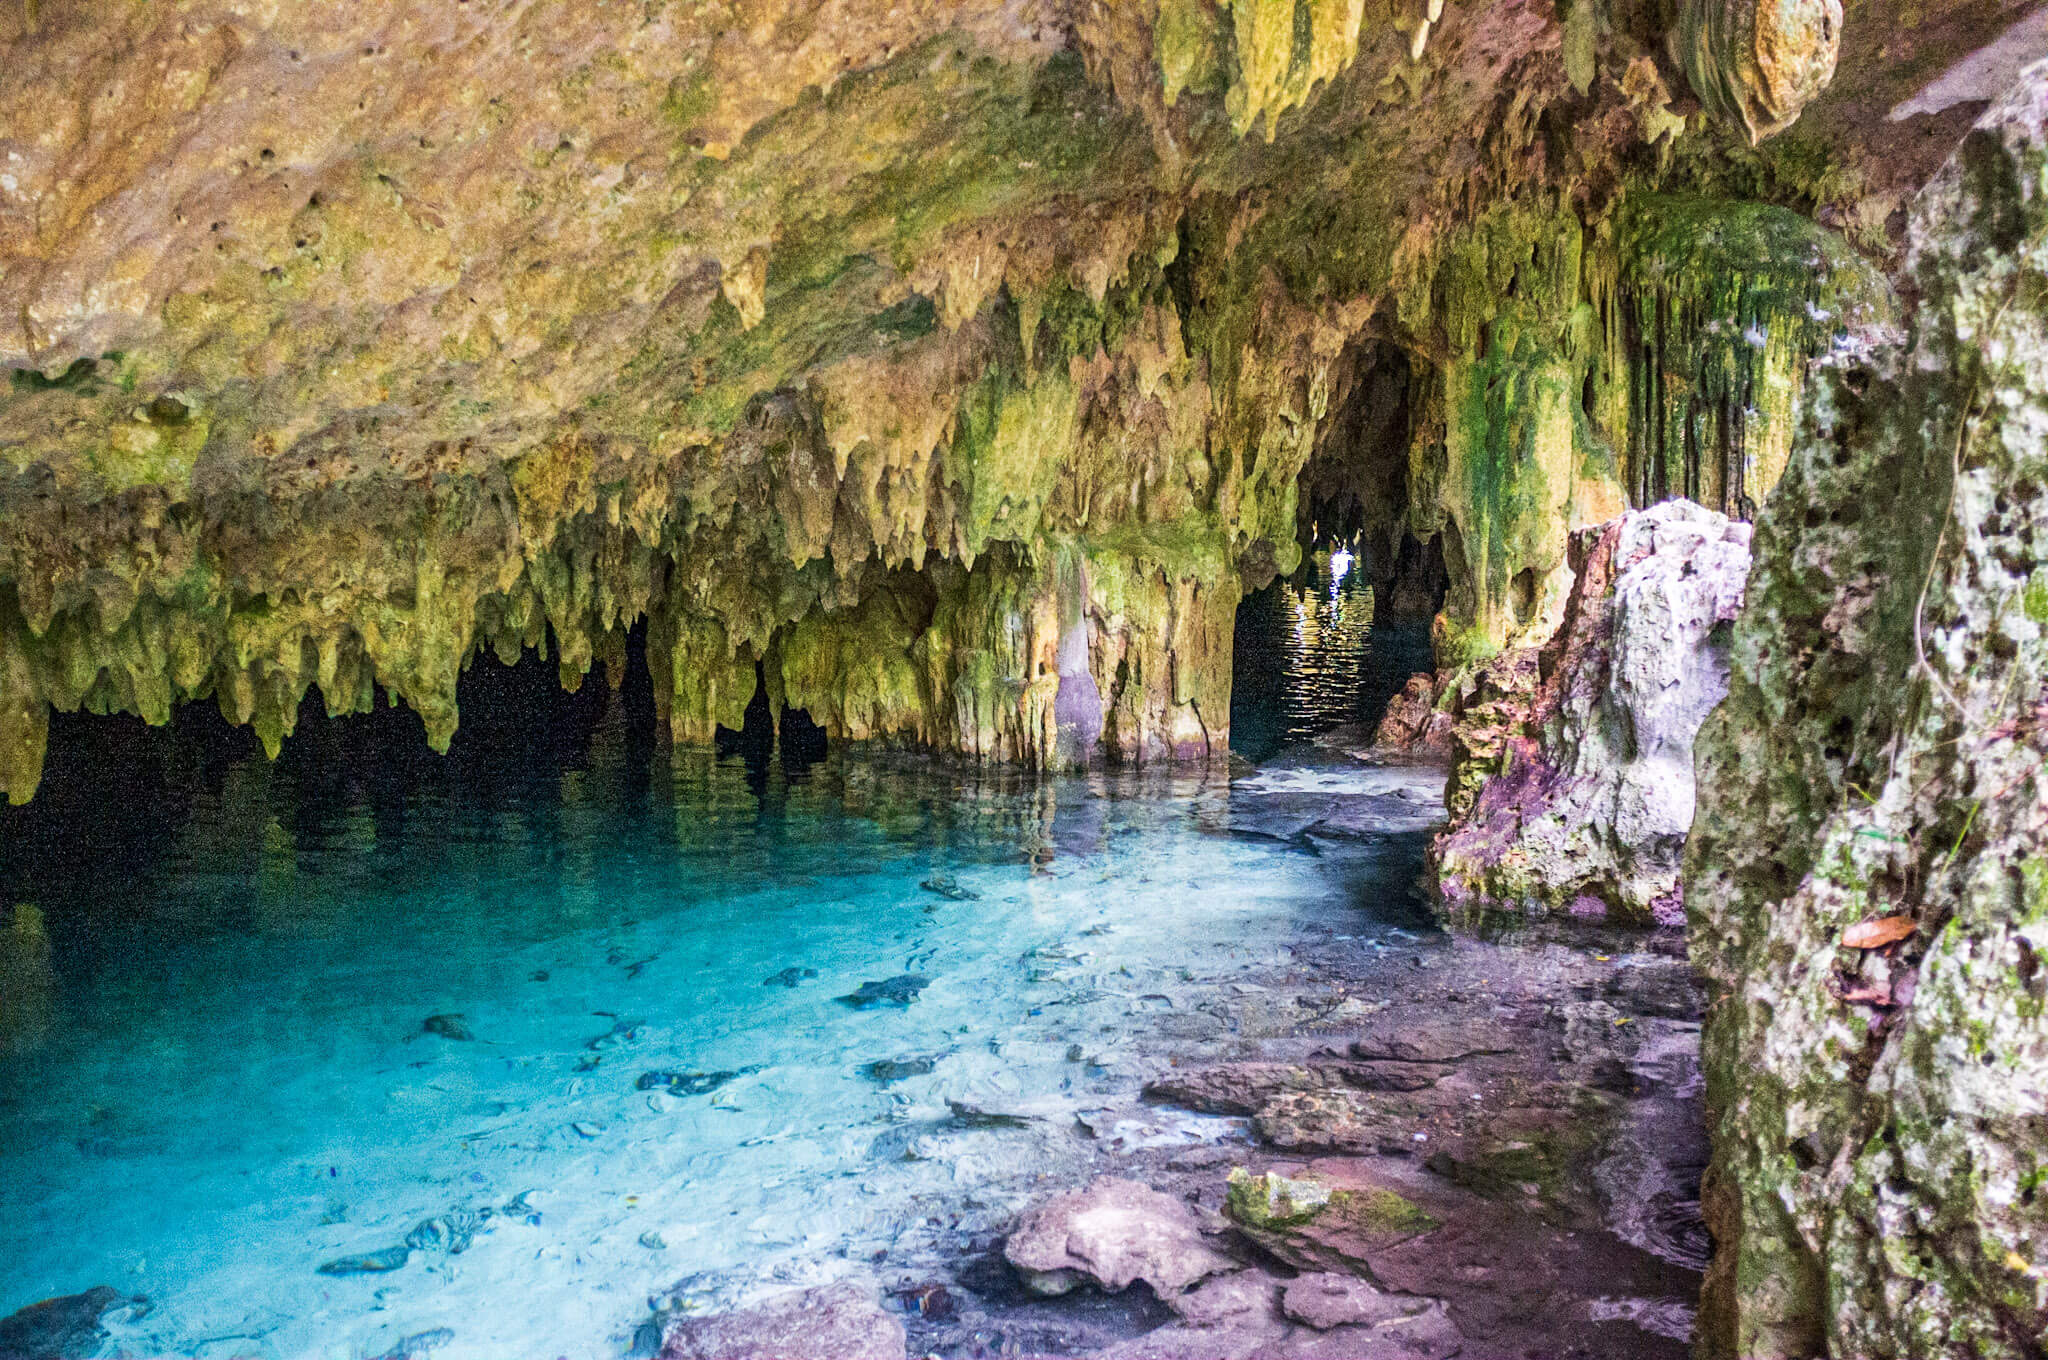 The crystal clear water in the cavern entrance at Pet Cemetery Cenote near Tulum